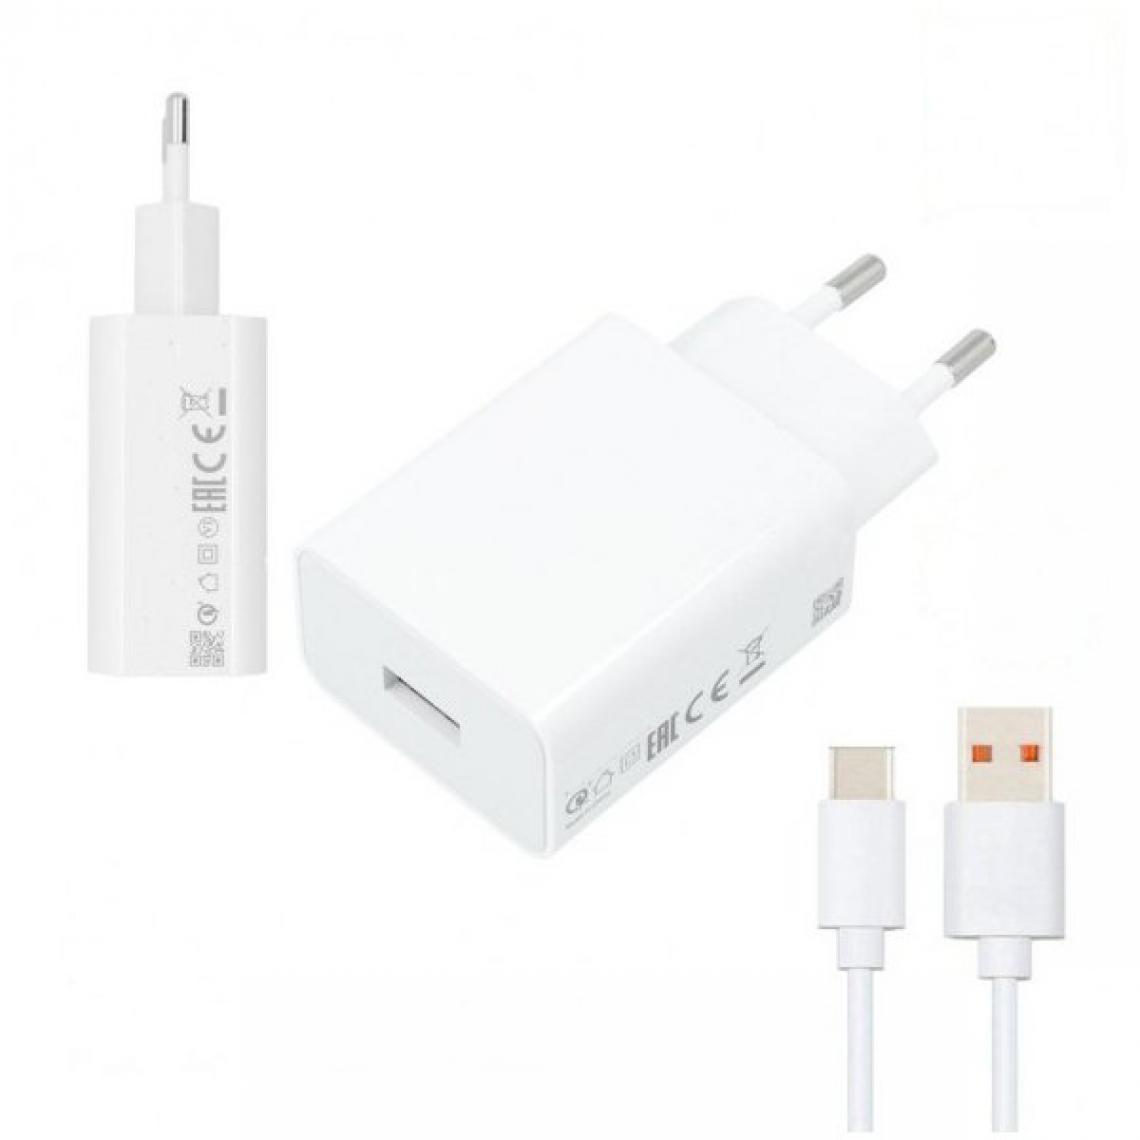 Phonecare - Kit Chargeur Turbo Fast Charge 33W 3A USB + Câble de Charge Turbo Fast Charge 5A Type-C 1M - Xiaomi Mi 10T Lite 5G - Autres accessoires smartphone